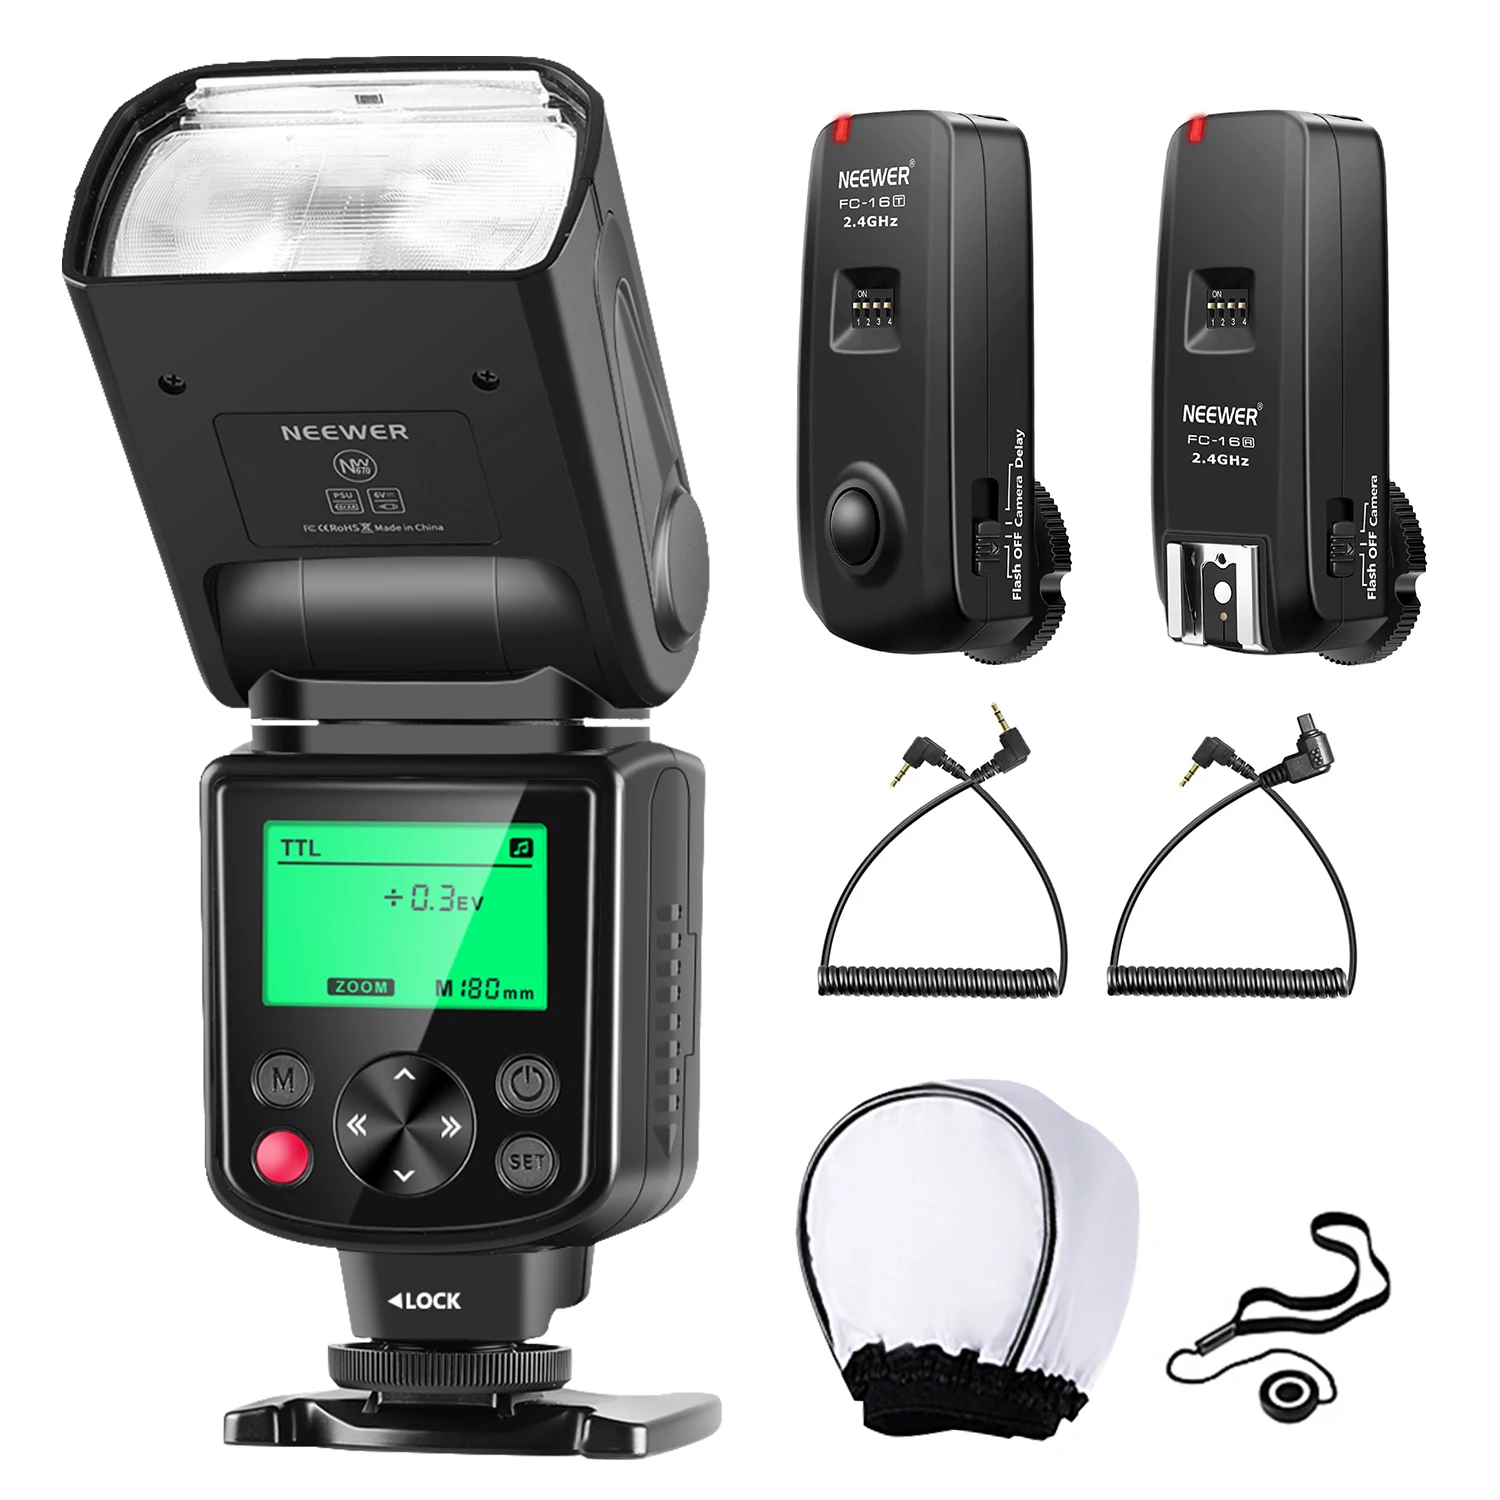 

Neewer NW670 TTL Flash Kit for CANON Rebel T5i T4i T3i T3 T2i T1i XSi XTi SL1, EOS 700D 650D 600D 1100D 550D 500D 450D 400D